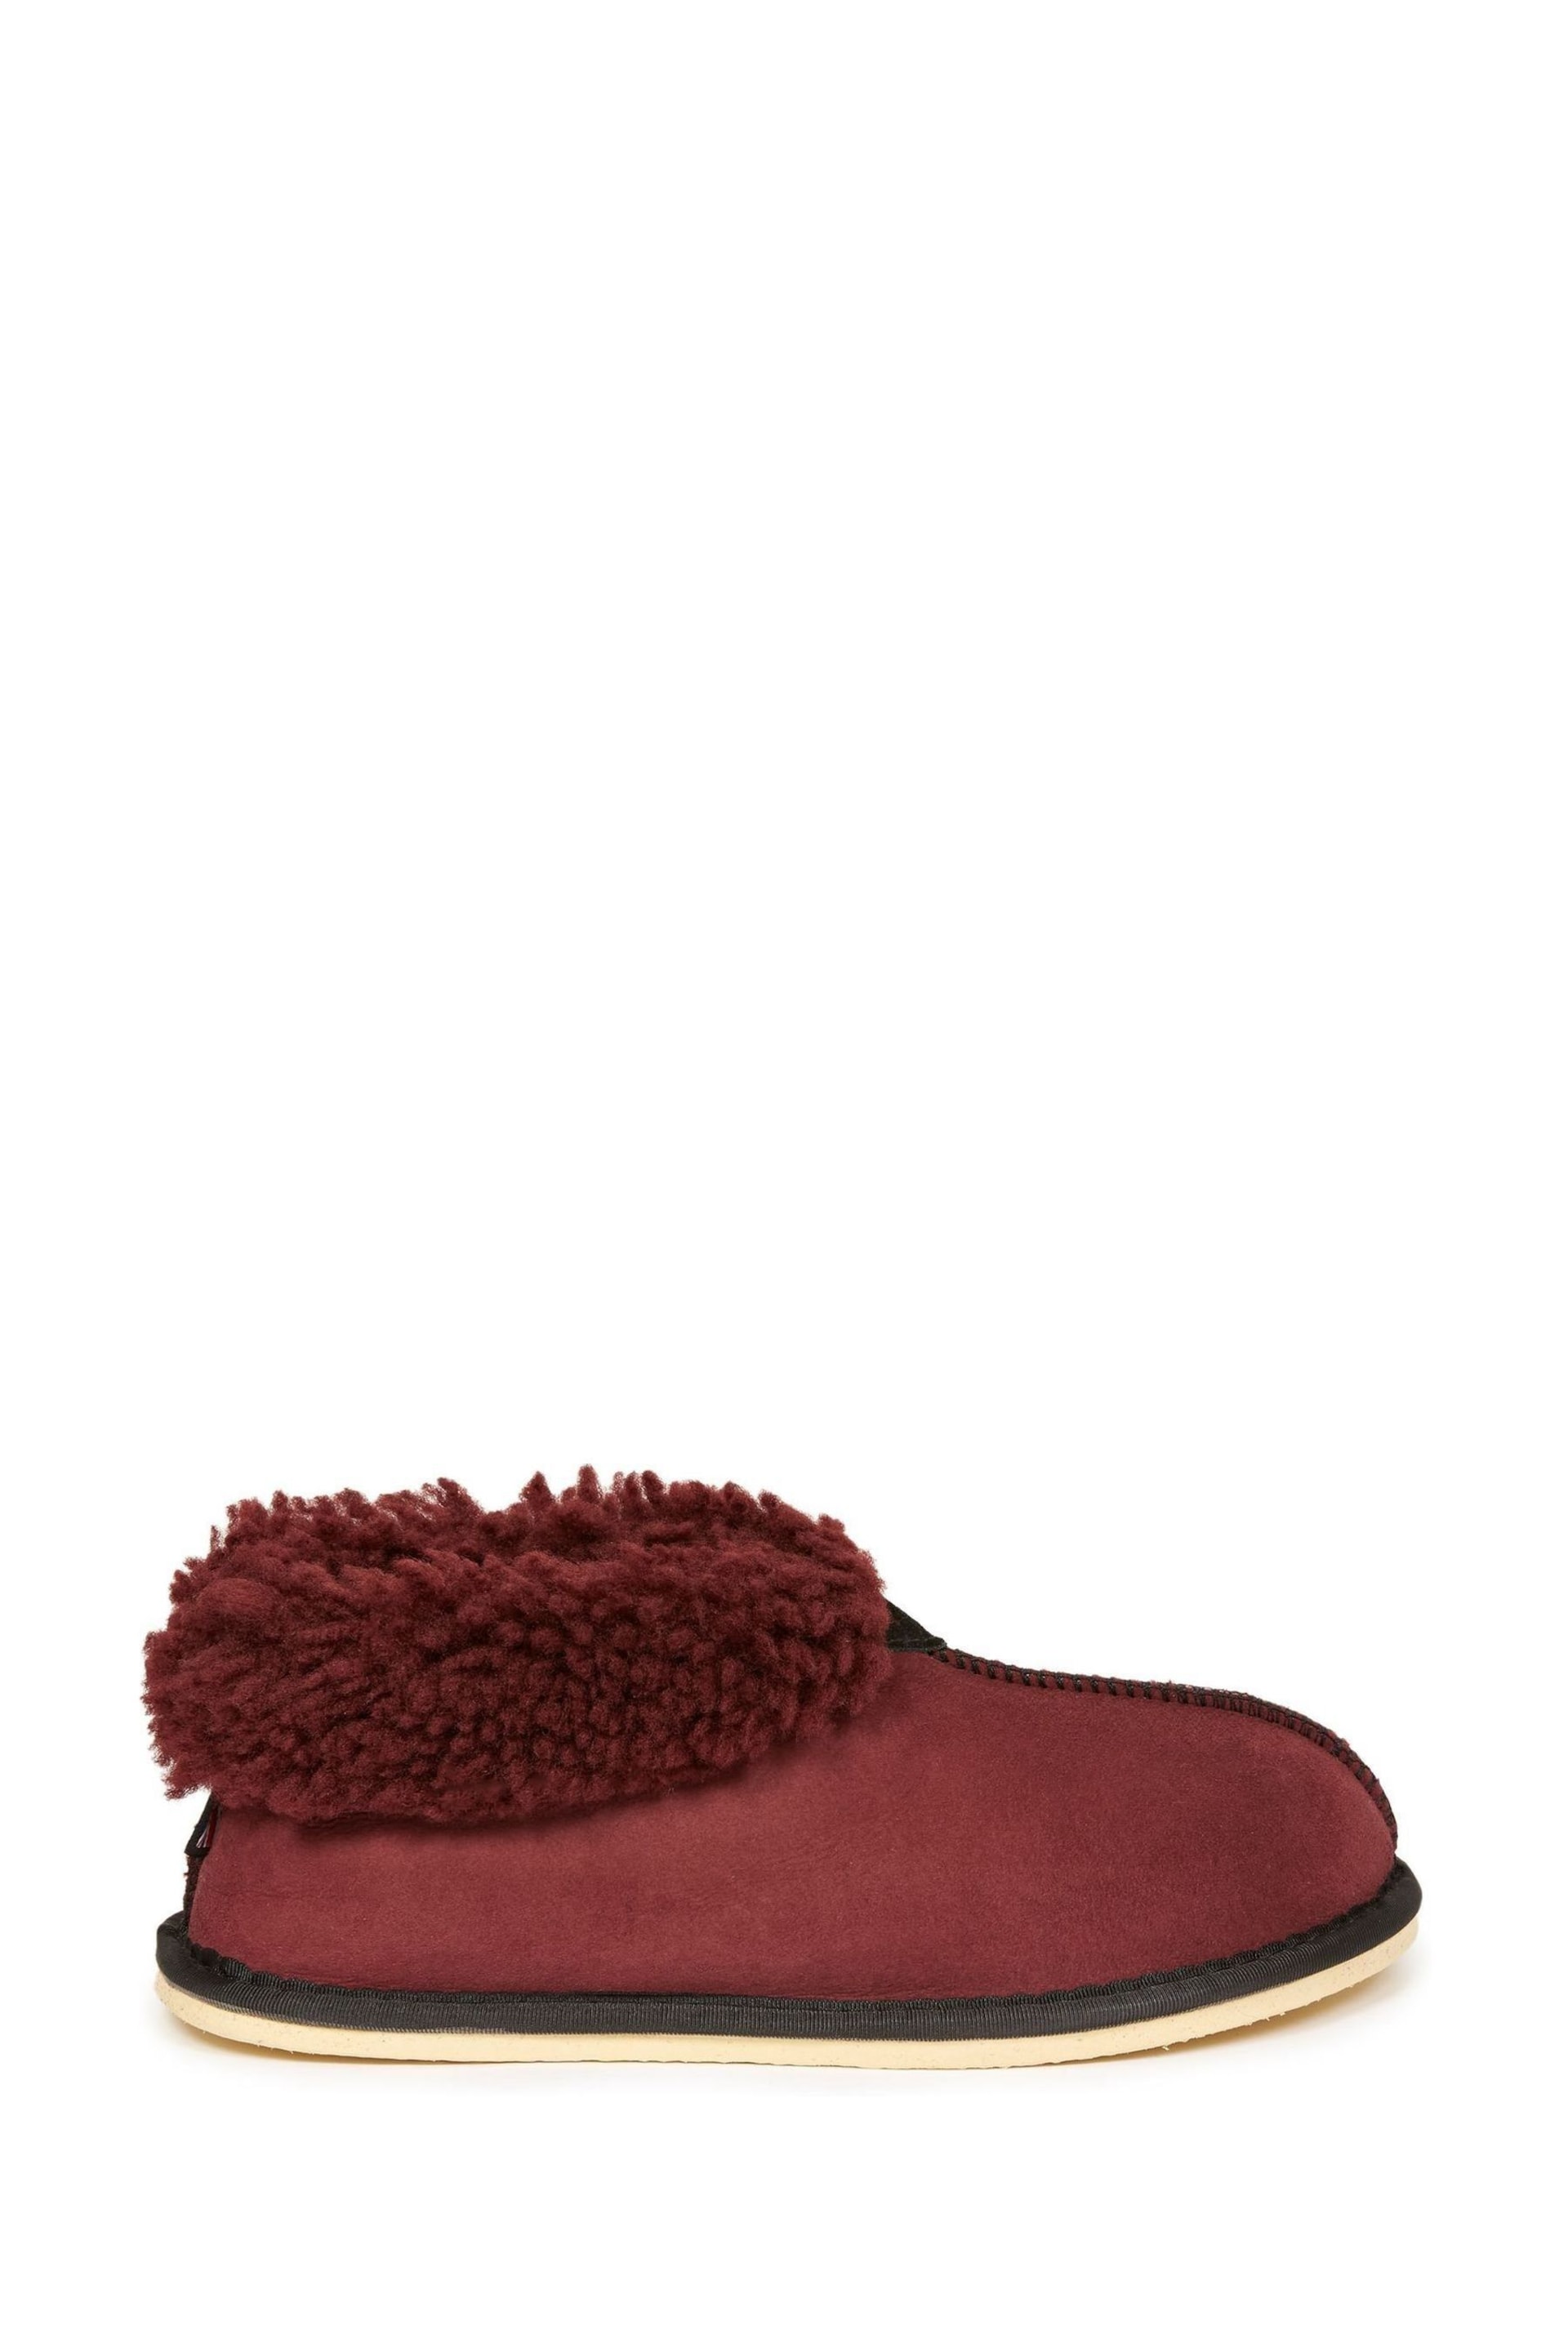 Celtic & Co. Ladies Sheepskin Bootee Slippers - Image 1 of 4